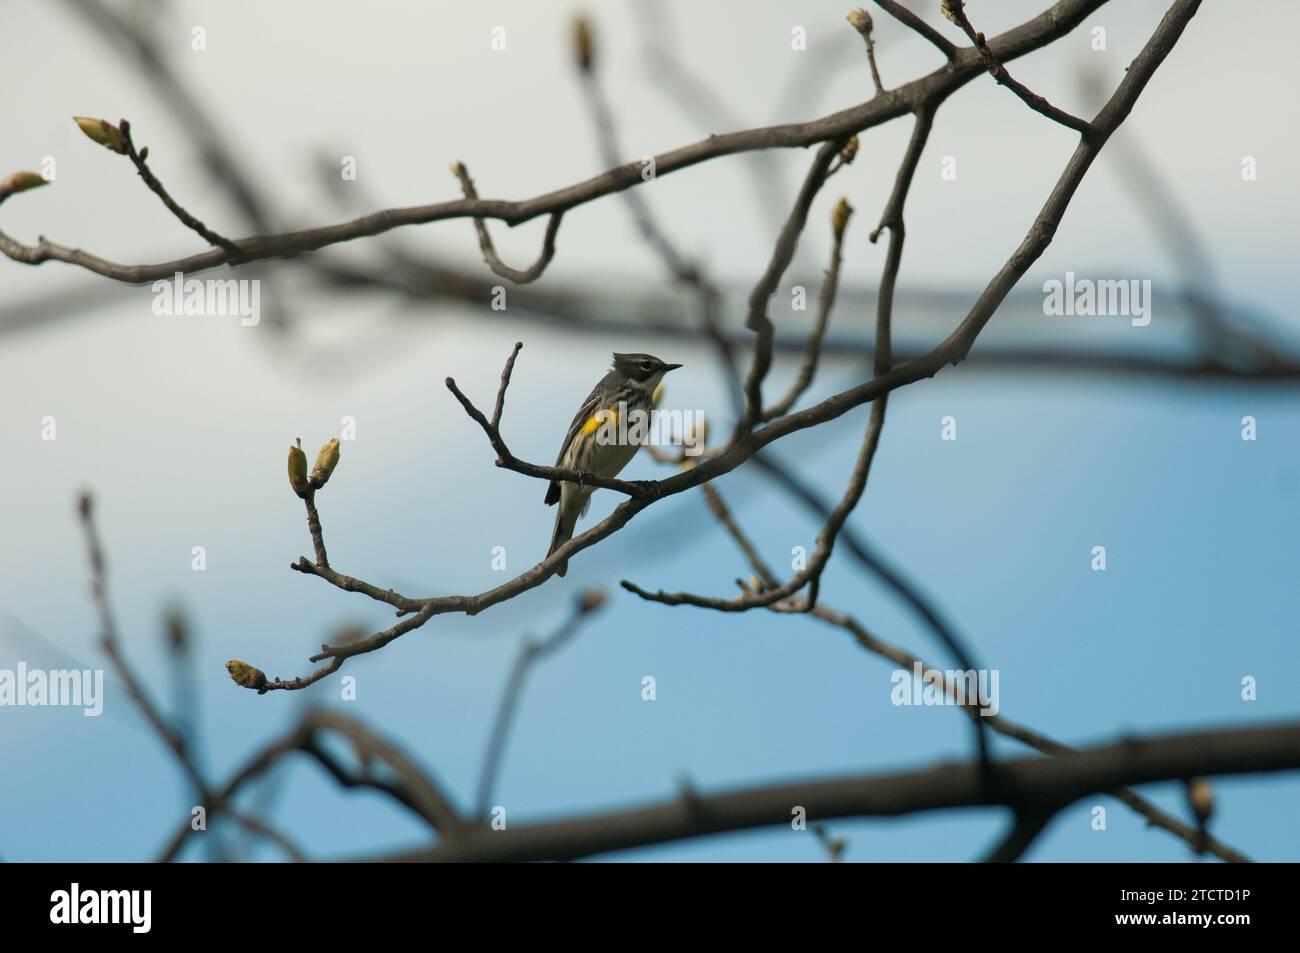 Yellow-Rumped (Myrtle) Warbler perched high up on a tree branch Stock Photo